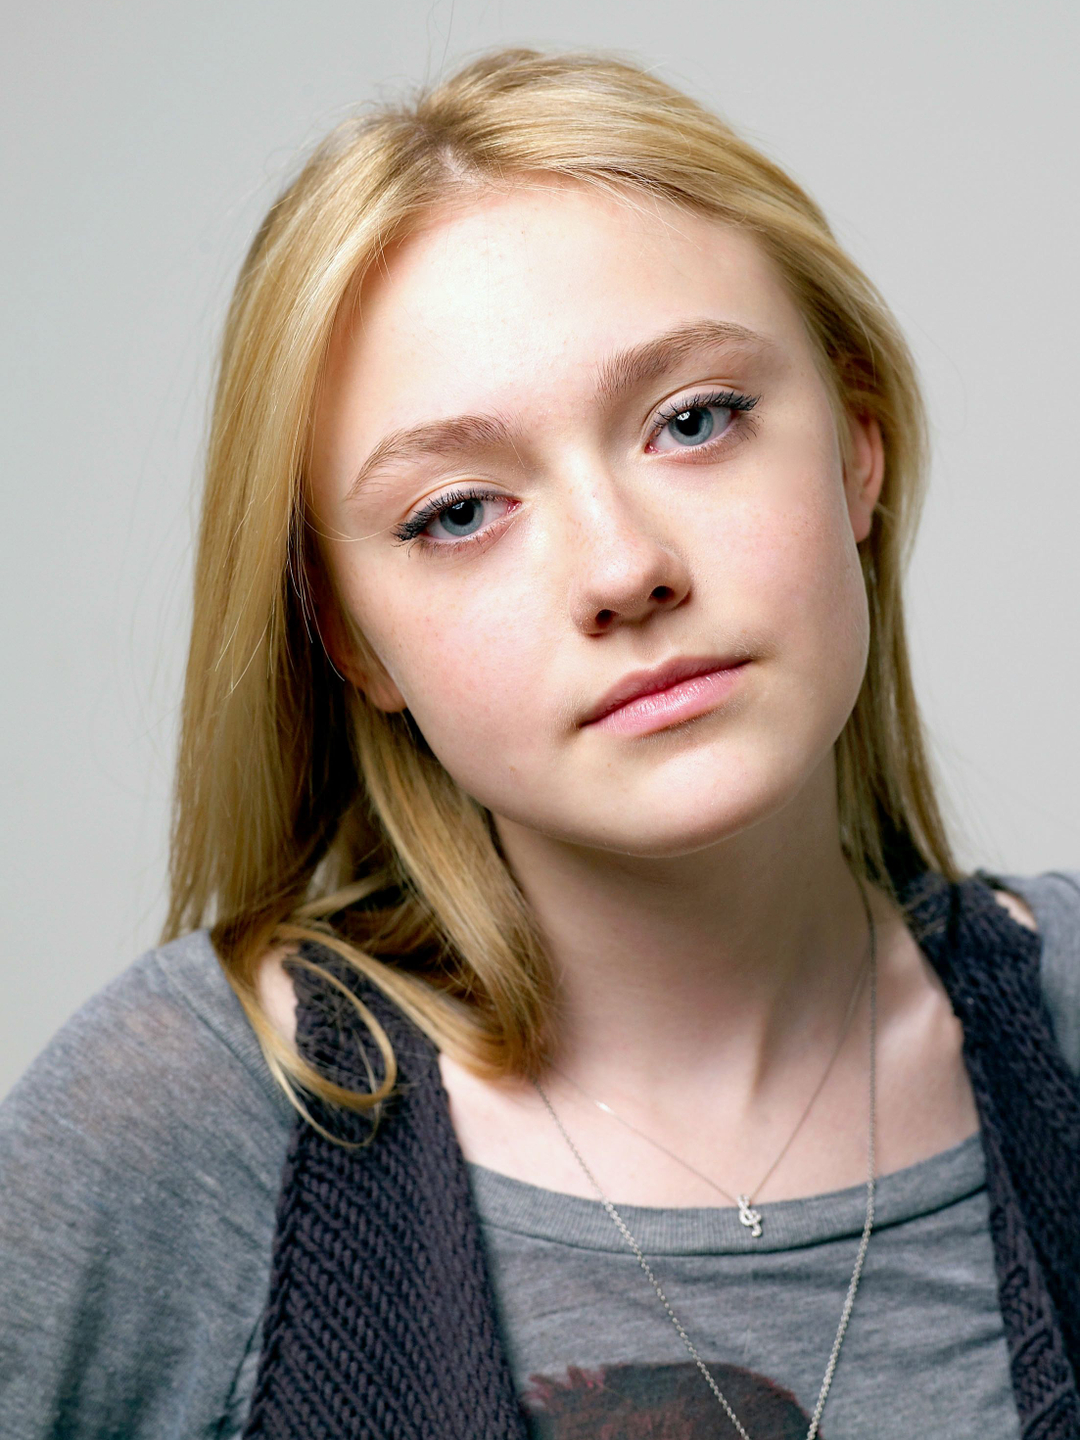 Dakota Fanning who is her mother